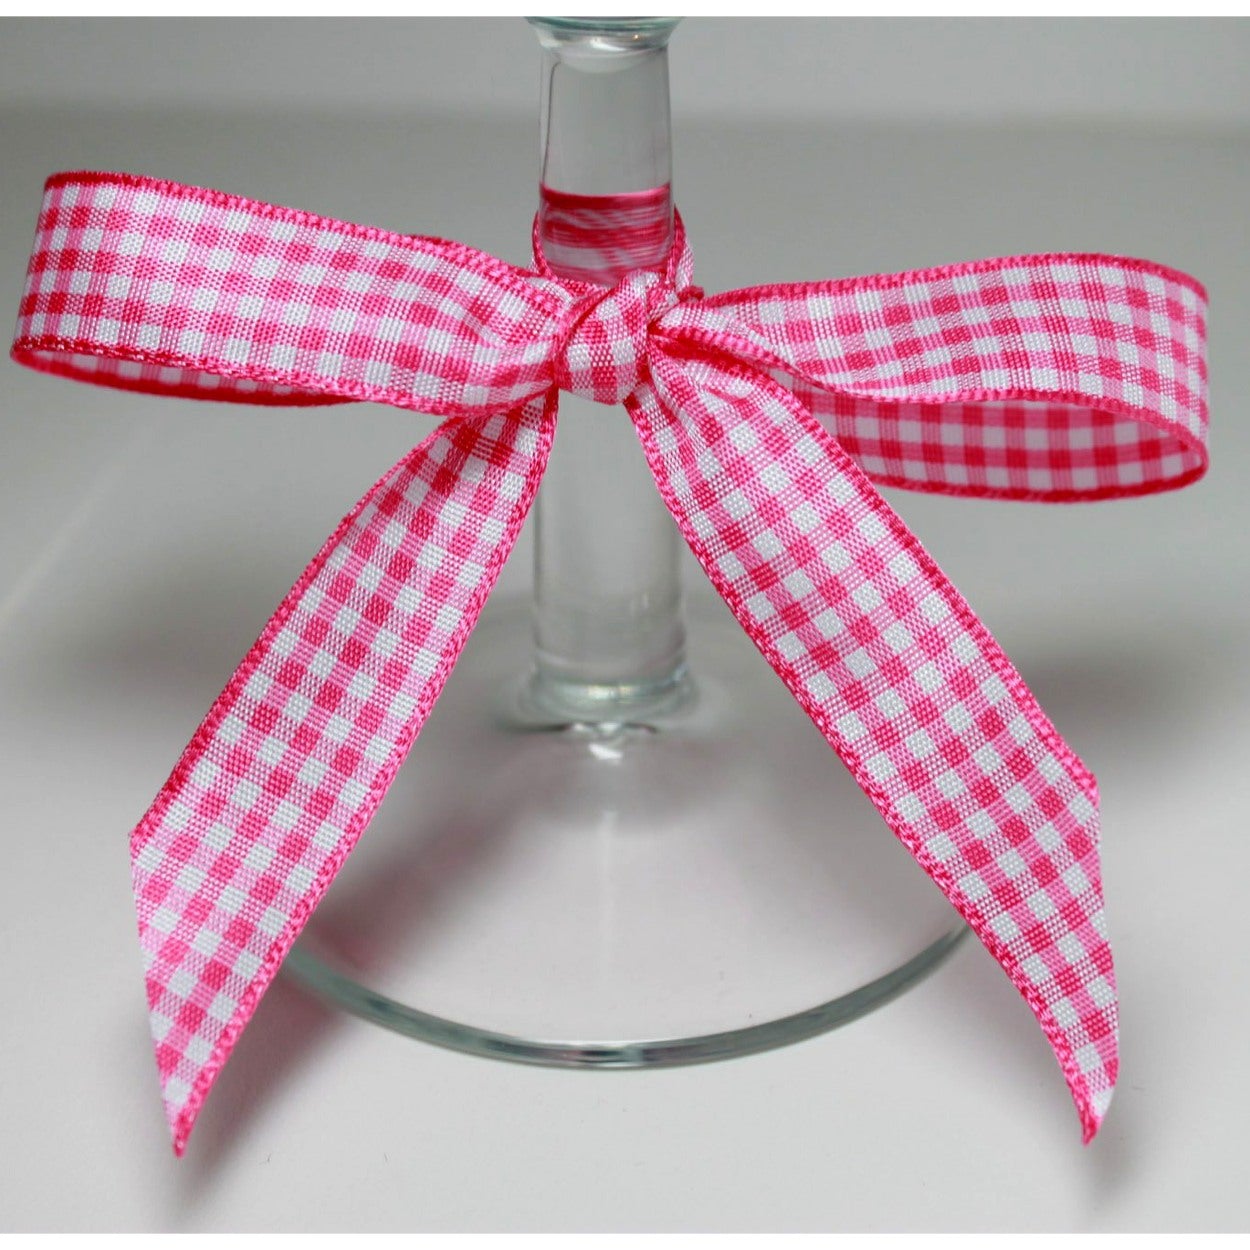 Berisfords Gingham Ribbon Shocking Pink from Jaycotts Sewing Supplies